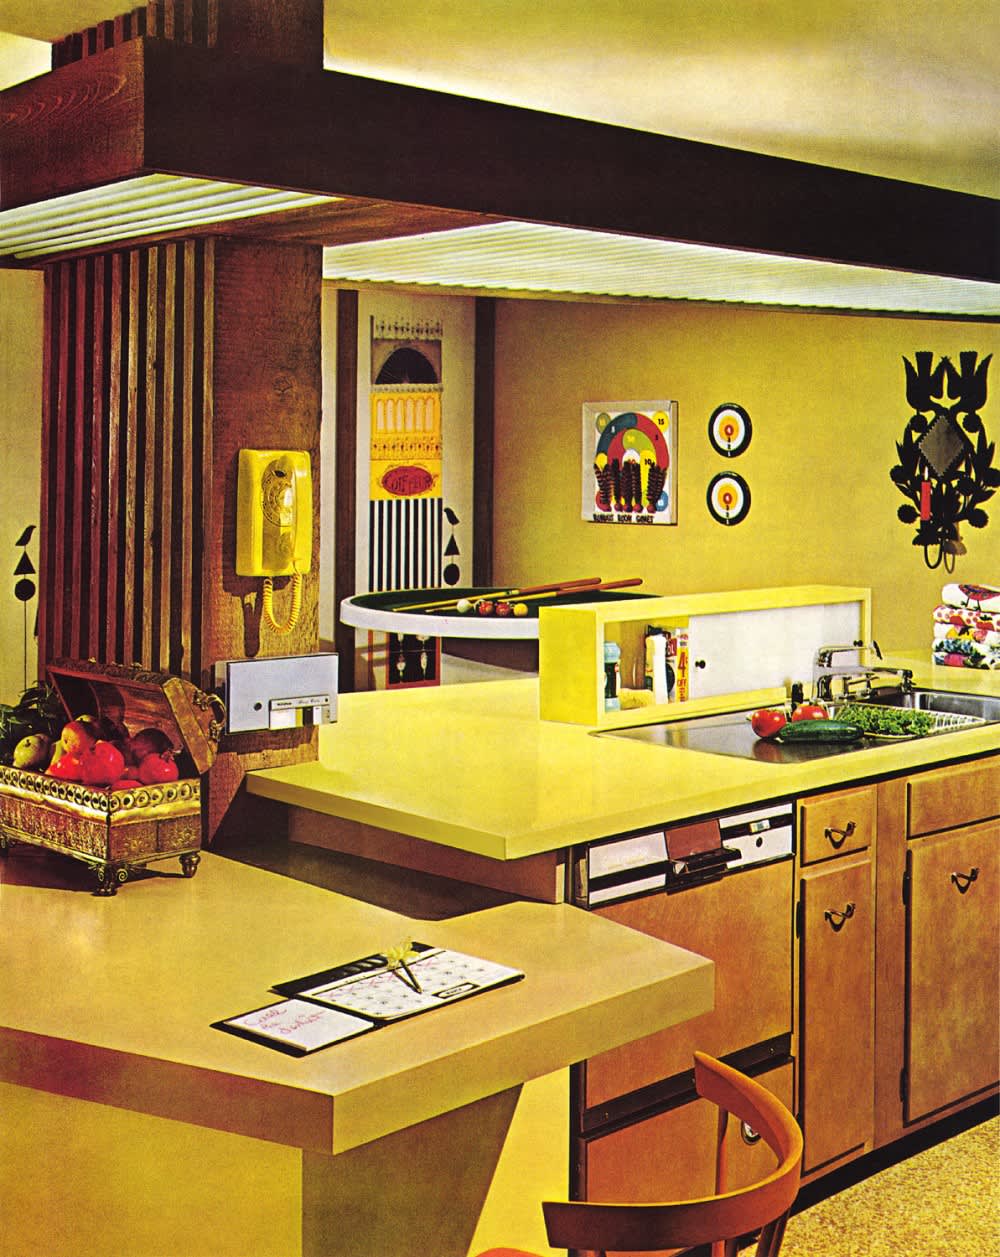 Kitchen Makeover Plans Bye Bye 1970 S With Images Budget